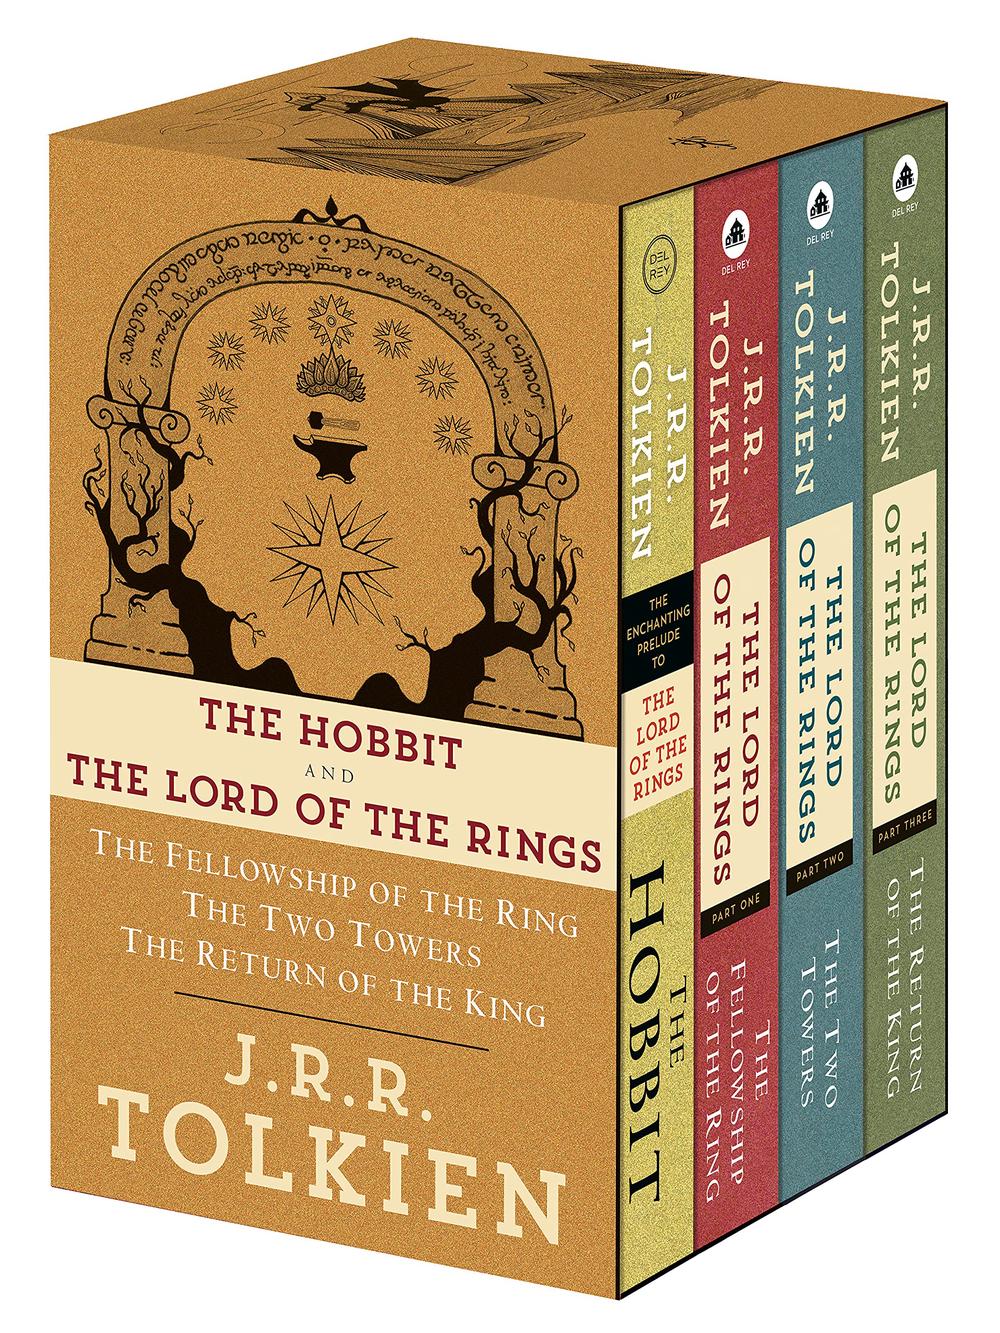 the lord of the rings by jrr tolkien